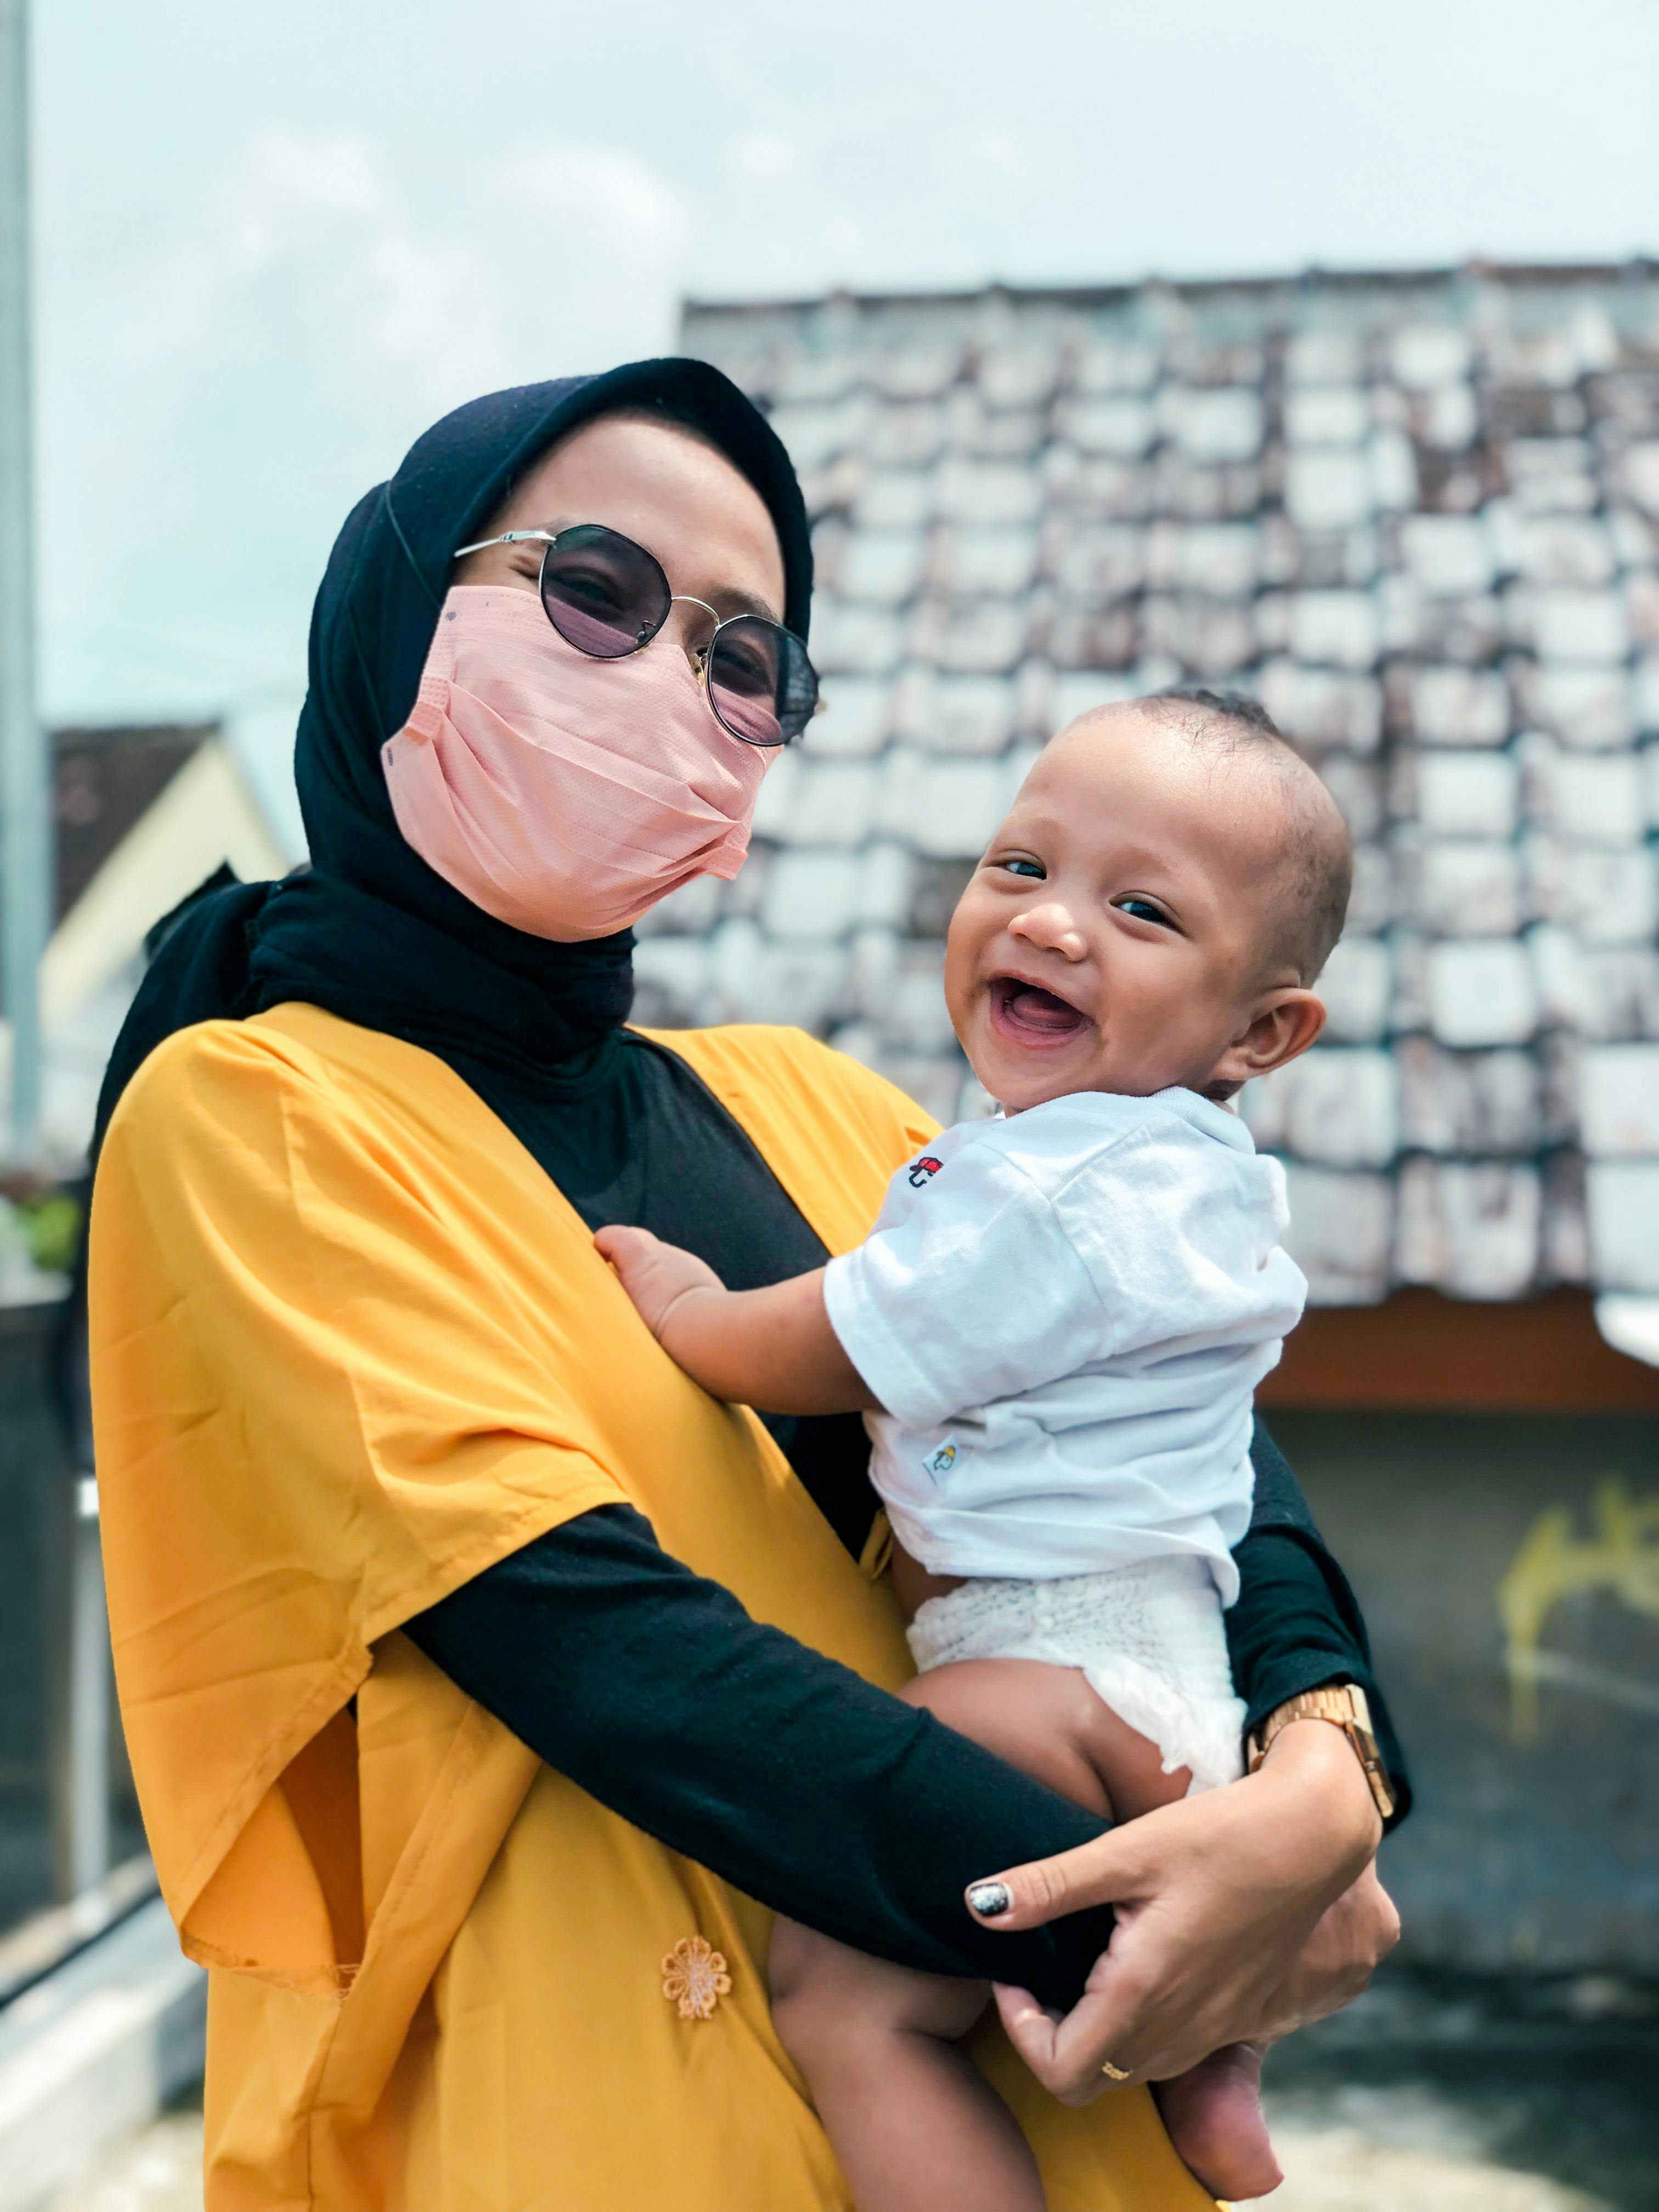 A woman wearing a mask and holding a smiling baby | Source: Pexels